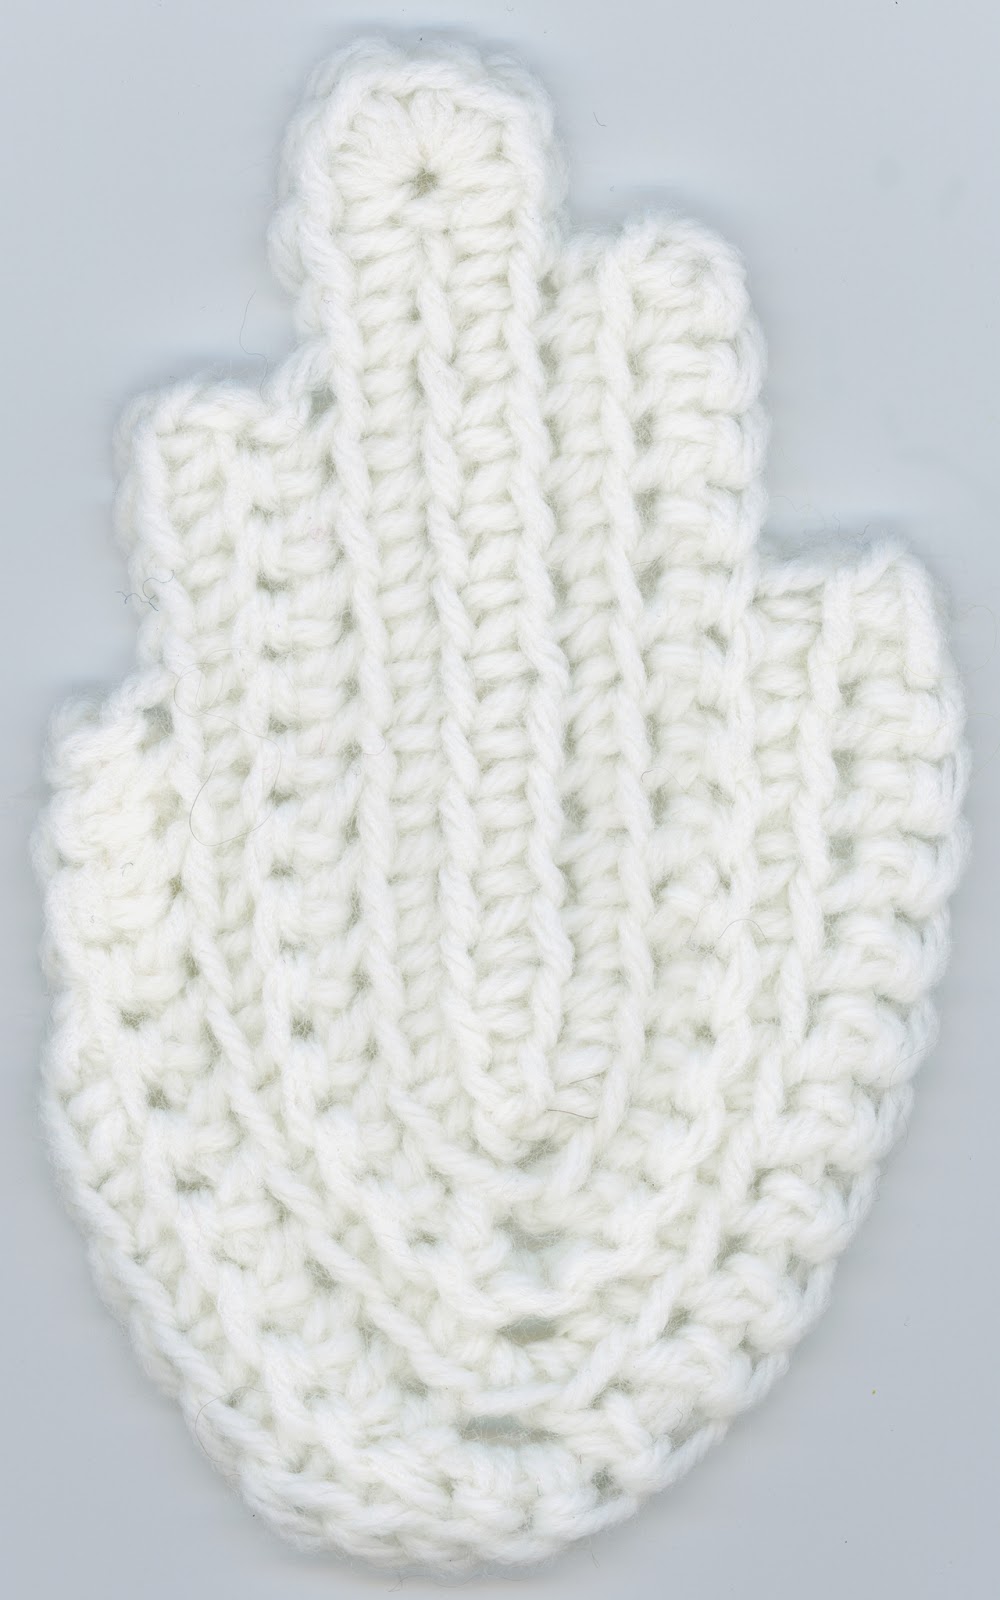 Crochet Spot » Blog Archive » Tips and Tricks for Stringing Beads onto Yarn  and Thread - Crochet Patterns, Tutorials and News